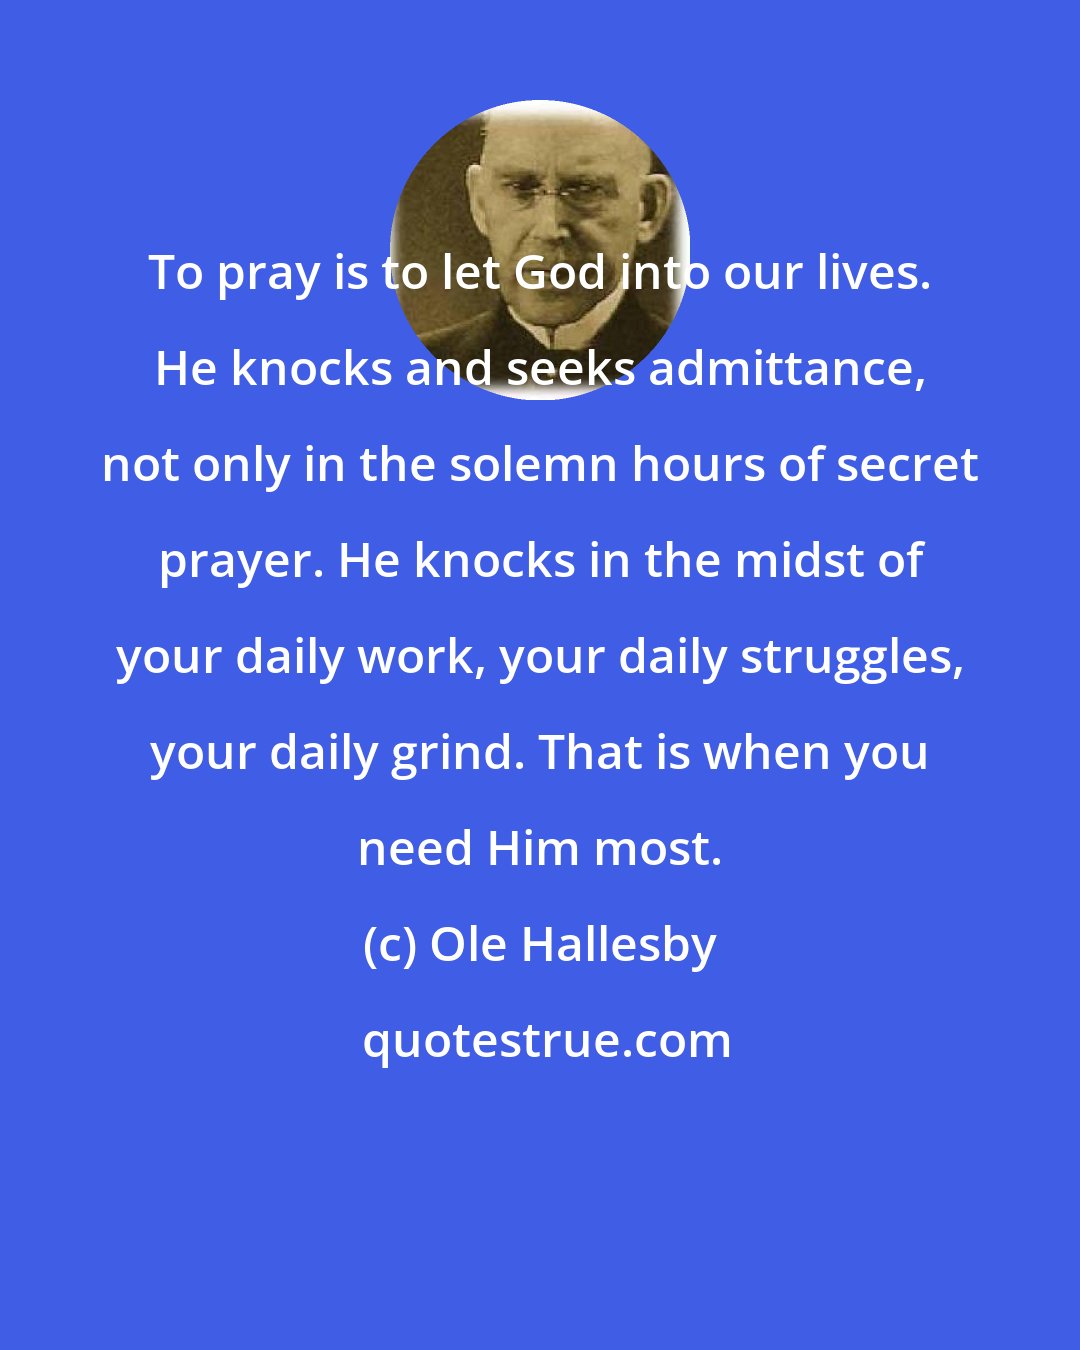 Ole Hallesby: To pray is to let God into our lives. He knocks and seeks admittance, not only in the solemn hours of secret prayer. He knocks in the midst of your daily work, your daily struggles, your daily grind. That is when you need Him most.